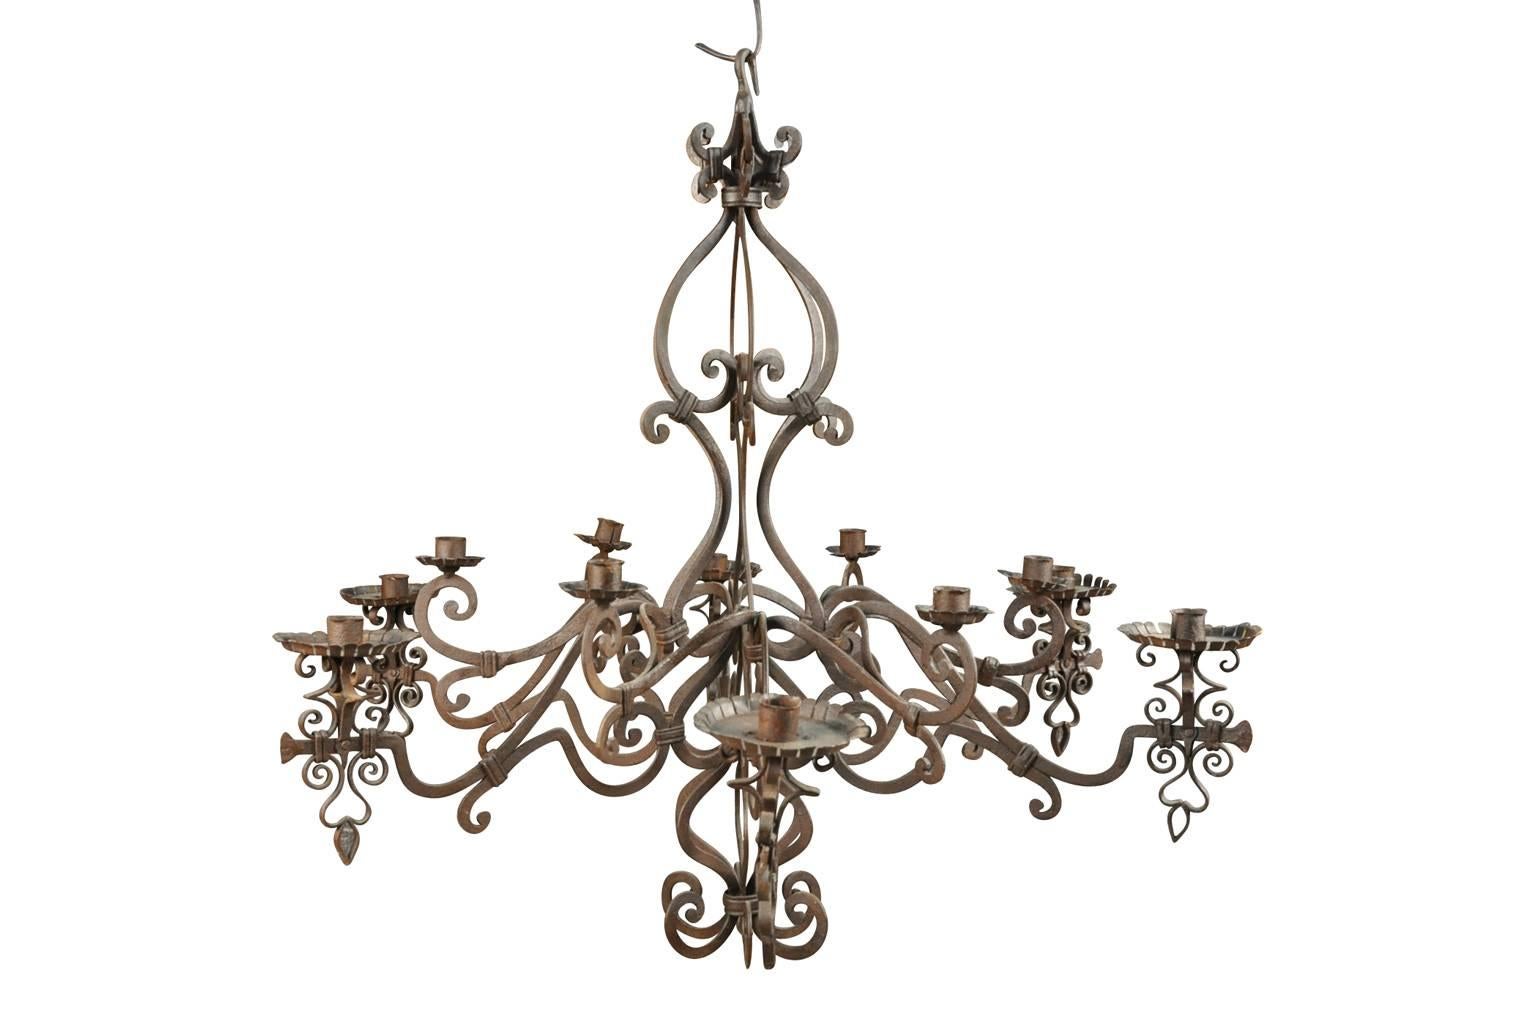 A terrific pair of forged iron chandeliers from Northern Italy. The chandeliers may be sold as a pair or individually. The price for the piece is $4900.